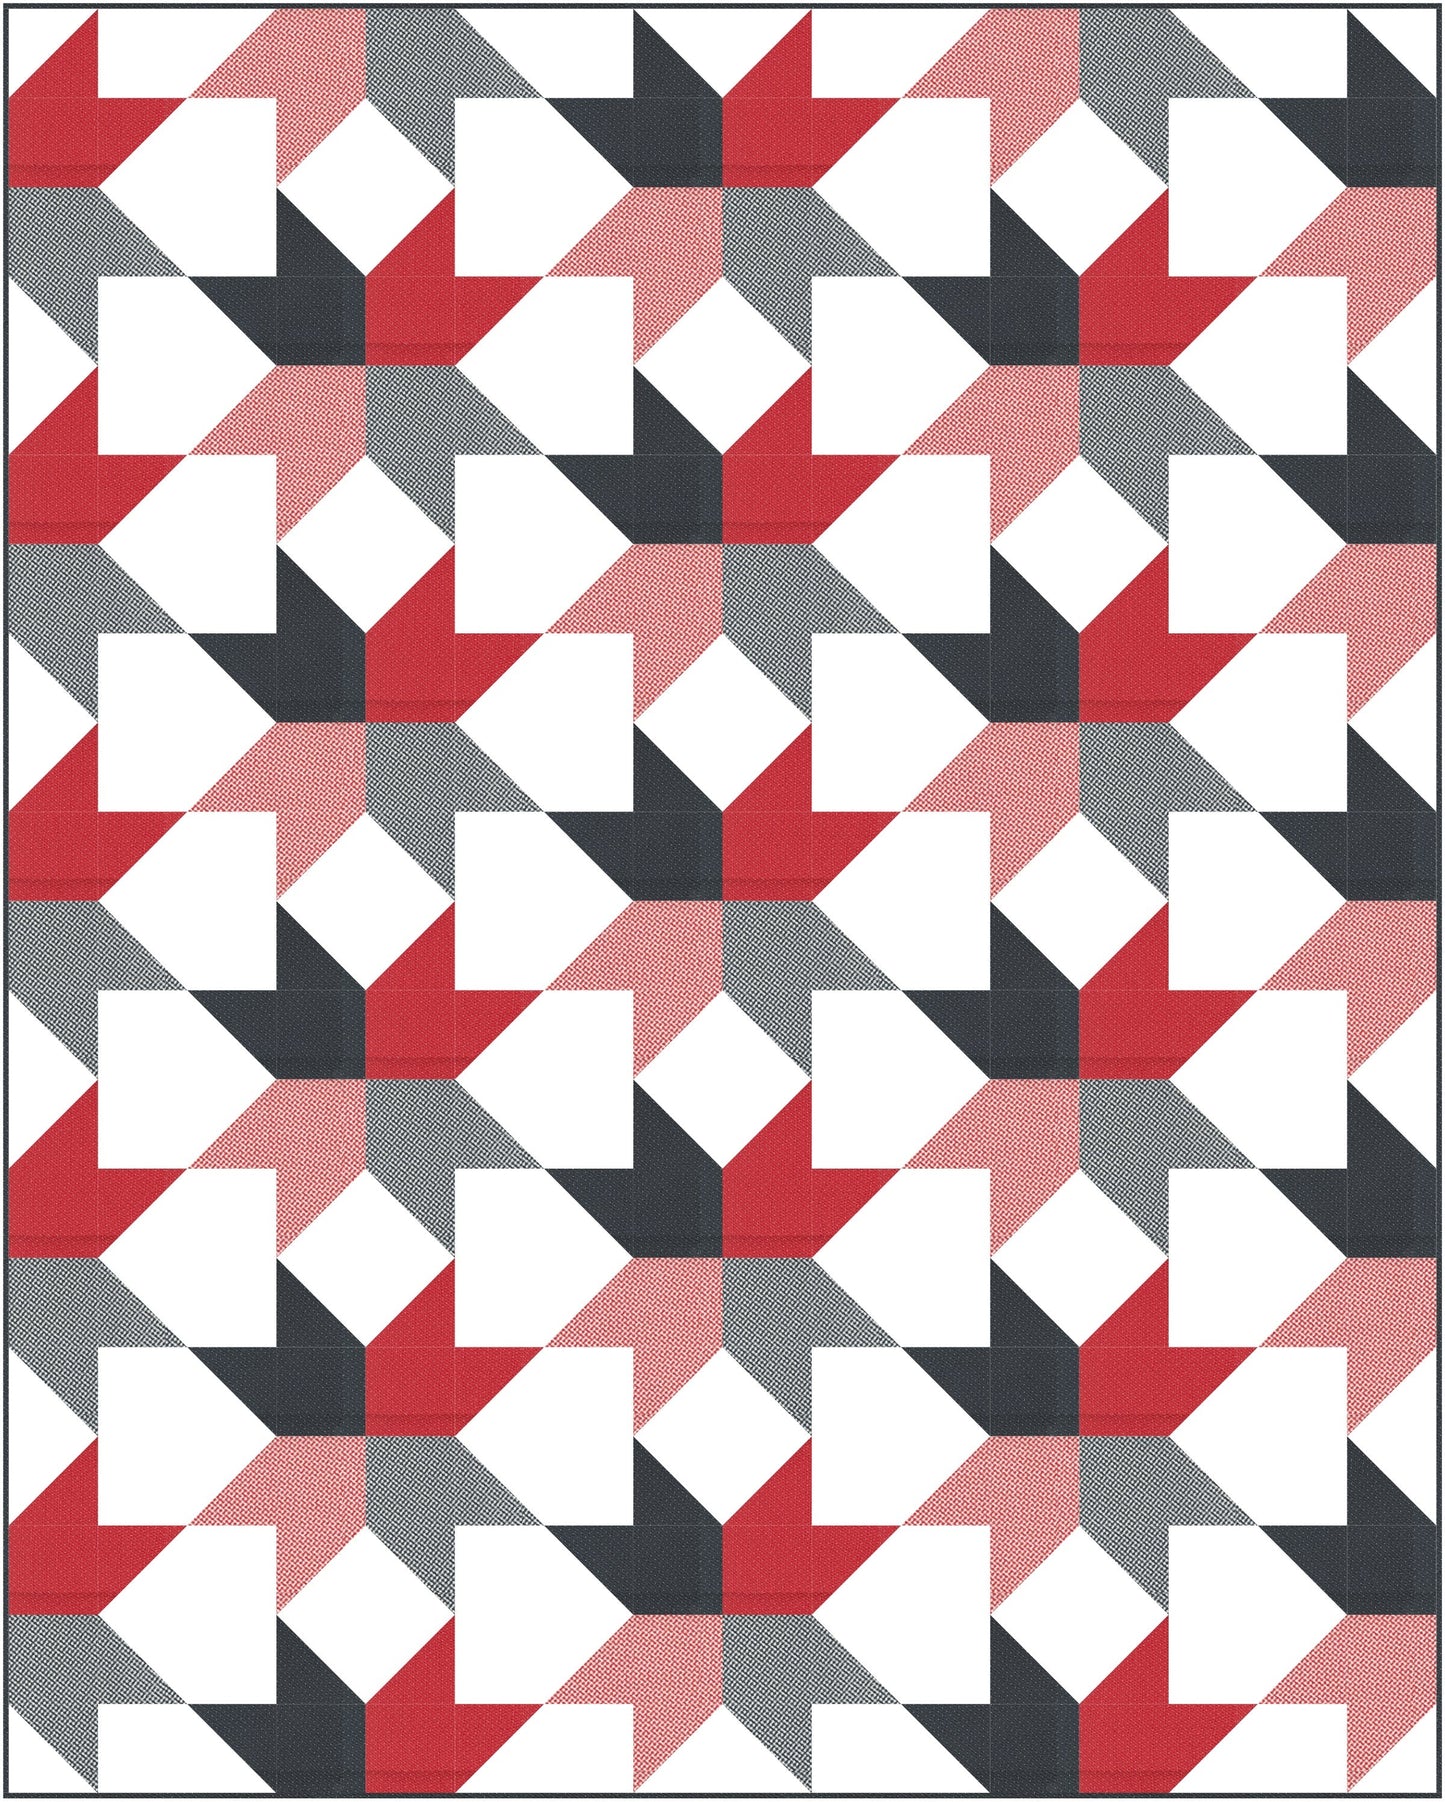 Forever Stars Quilt Pattern PDF DOWNLOAD Busy Hands Quilts $12.99